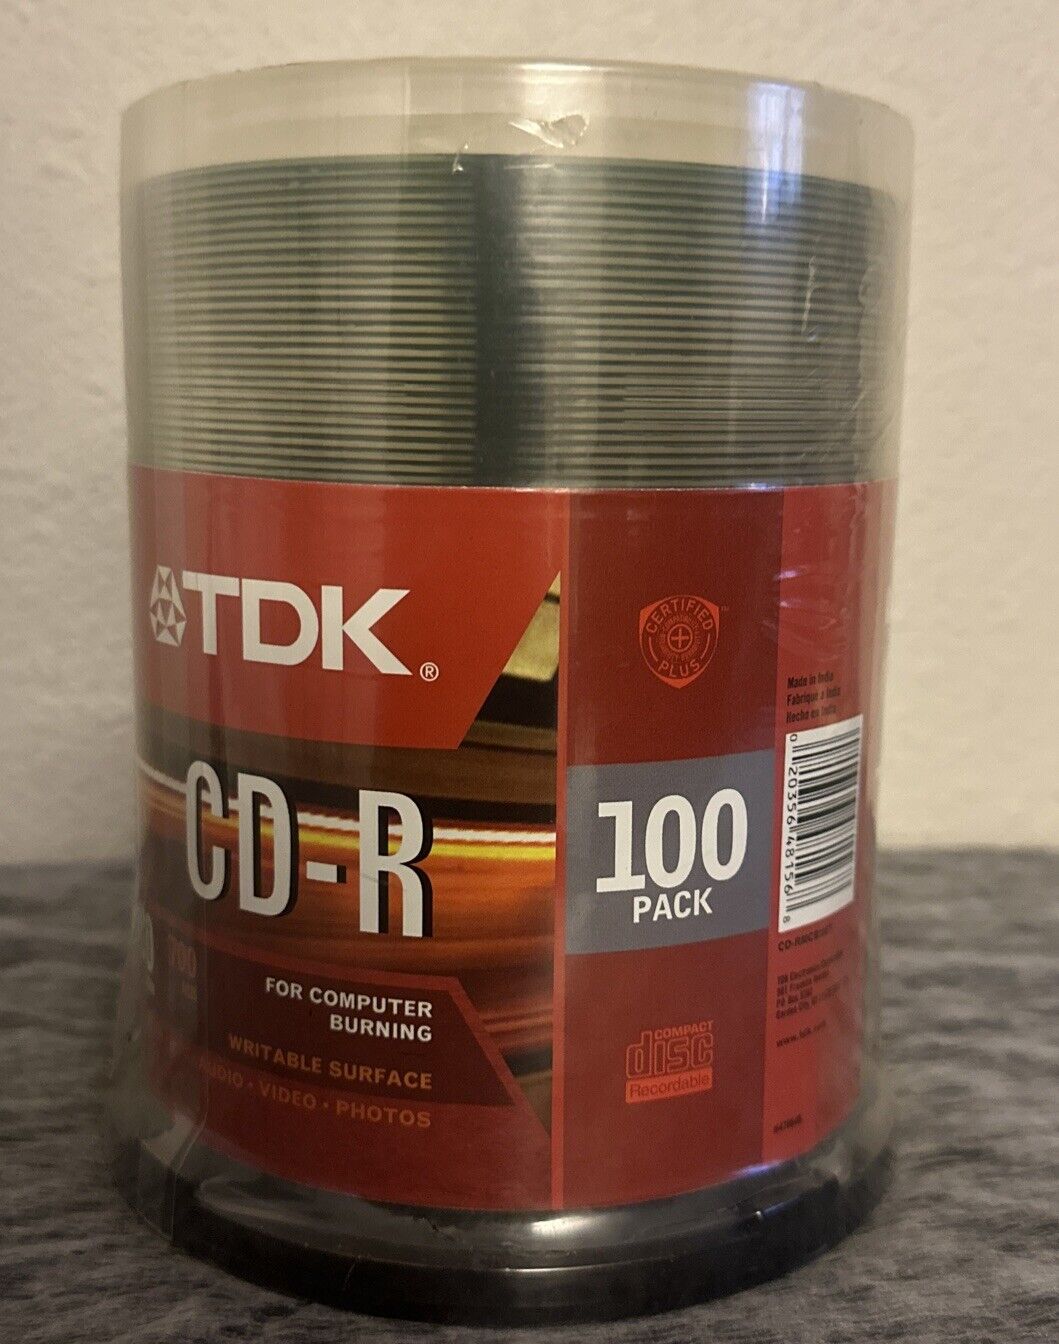 TDK CD-R 700MB 80 minute 100-Pack Writable Surface BRAND NEW Pack